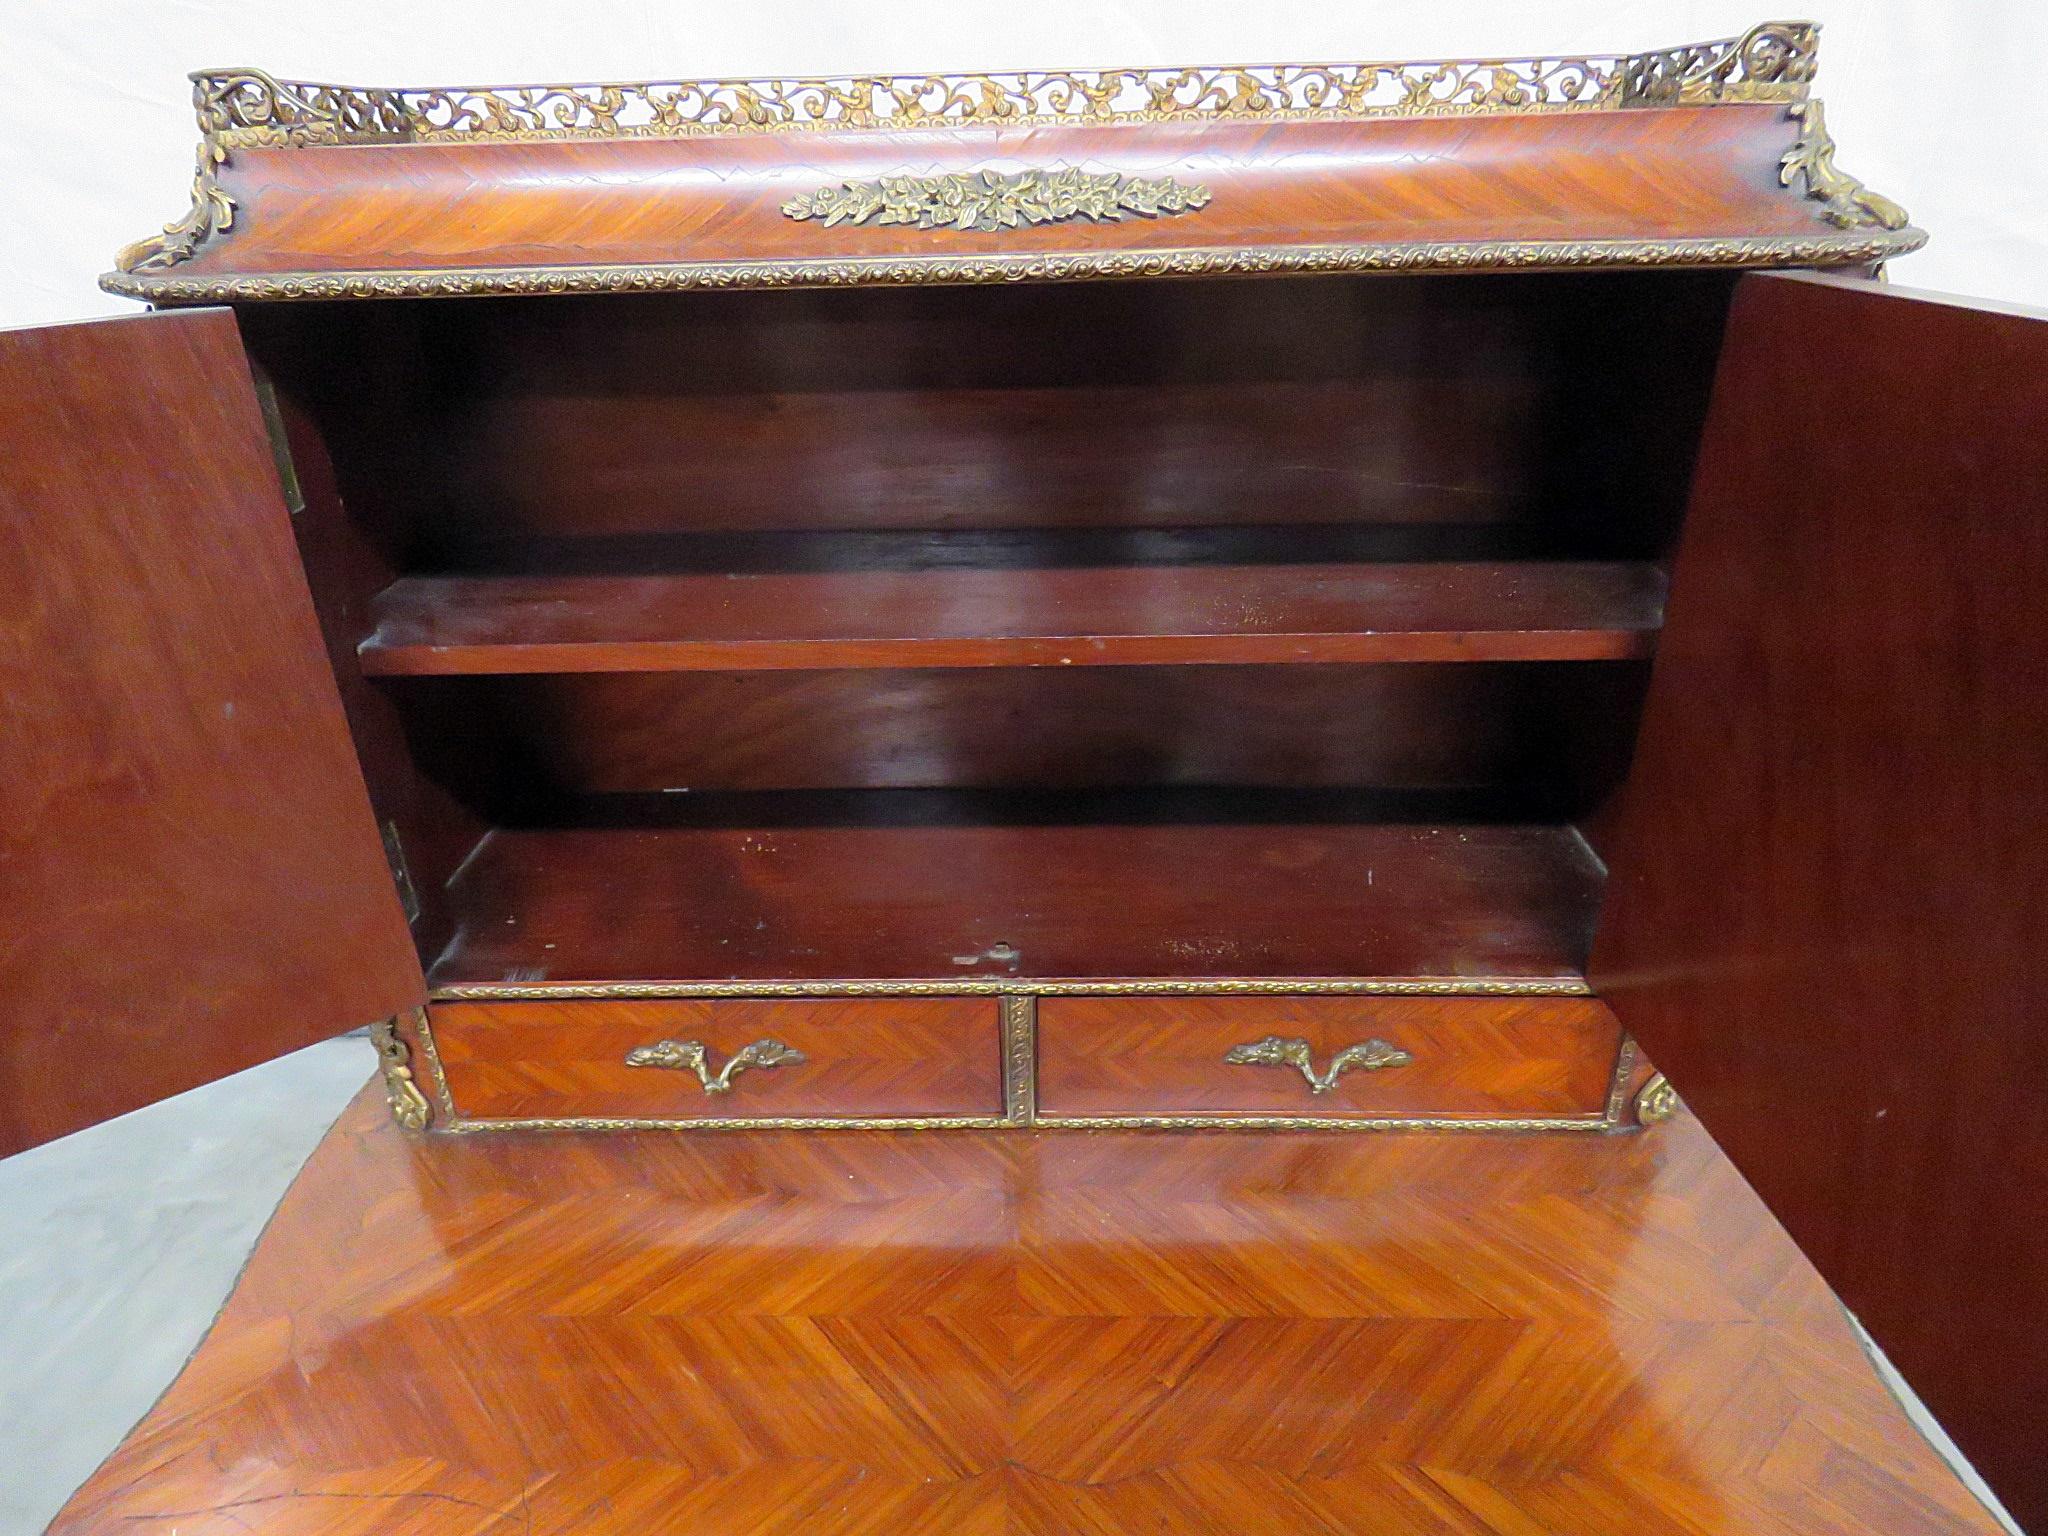 Bronze Antique C1870s French Louis XVI Style Inlaid King Wood Ladies Writing Desk For Sale